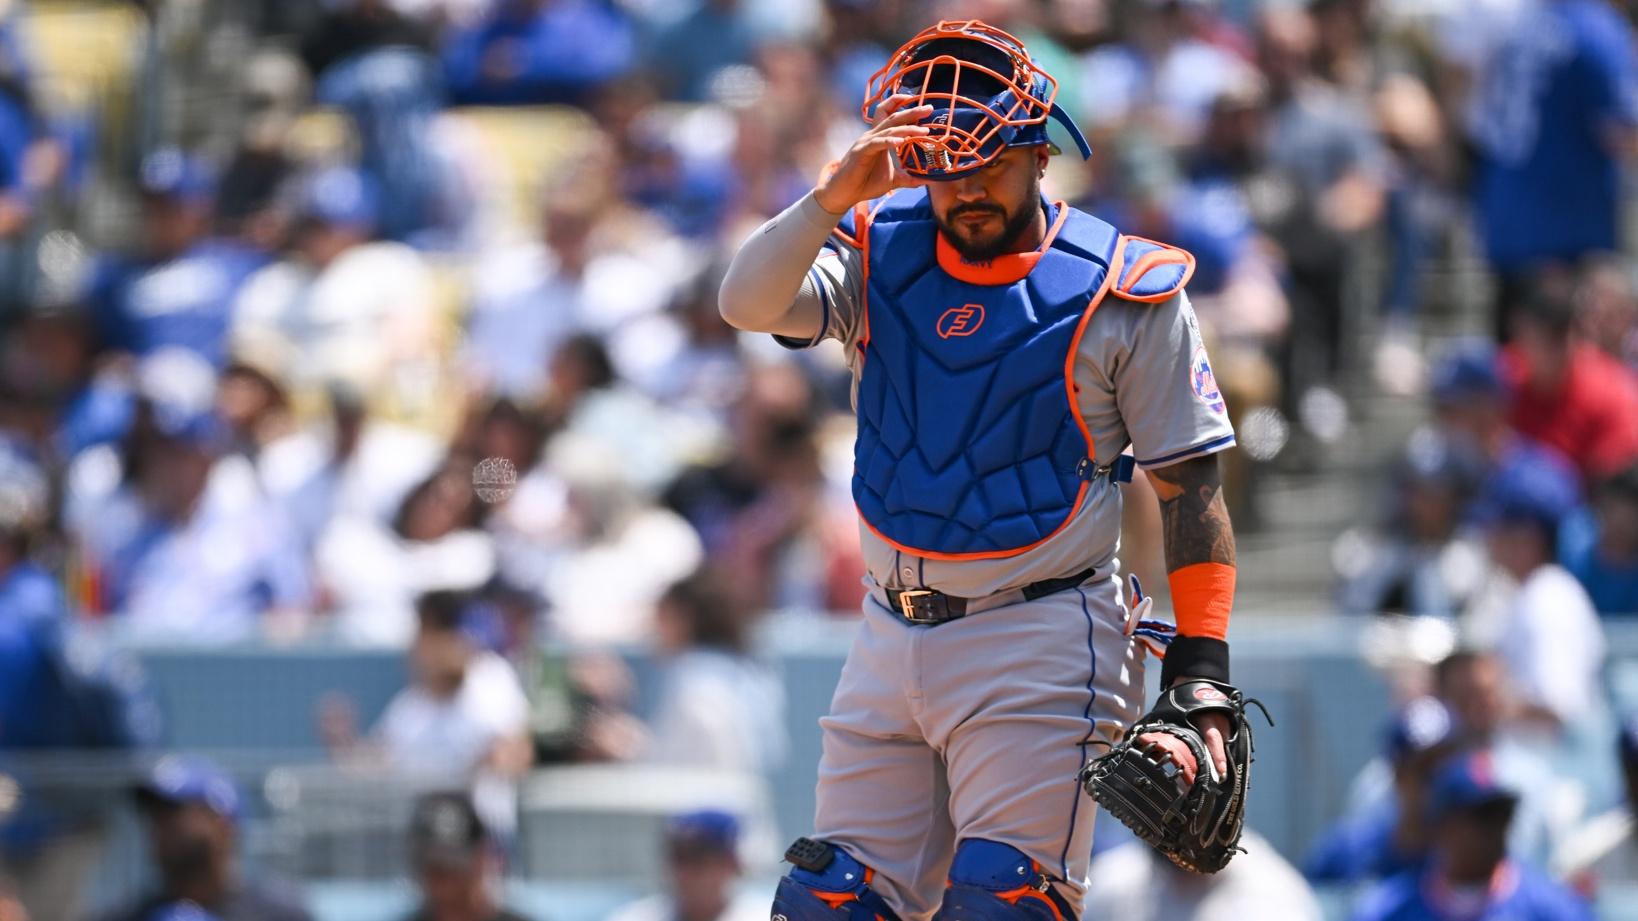 New York Mets catcher Omar Narvaez (2) against the Los Angeles Dodgers during the first inning at Dodger Stadium / Jonathan Hui - USA TODAY Sports